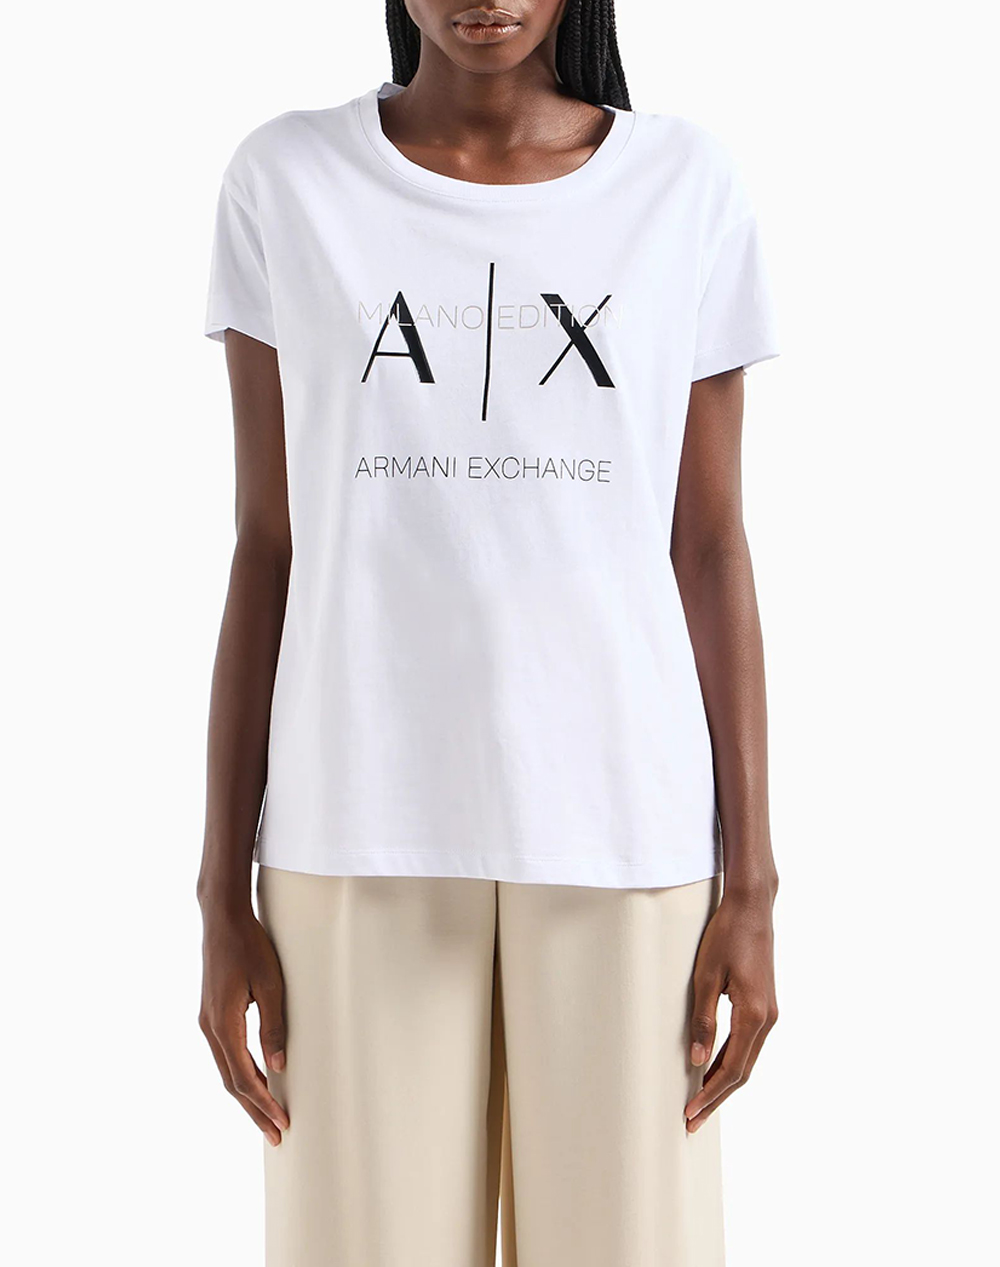 ARMANI EXCHANGE T-SHIRT 3DYT36YJ3RZ-1000 White 3810AARME3400104_XR12351